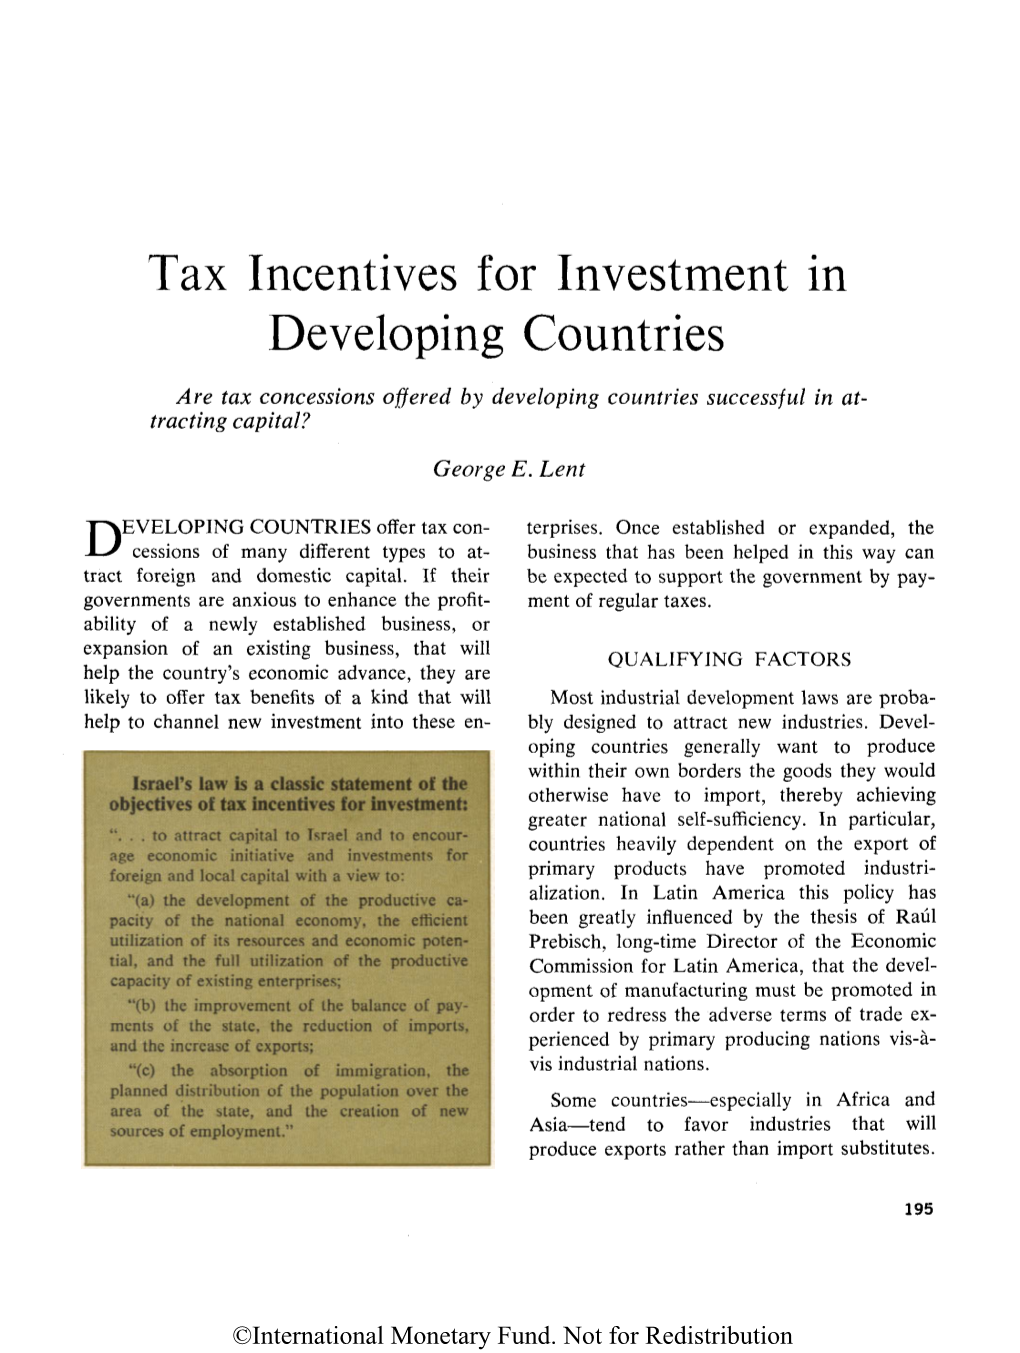 Tax Incentives for Investment in Developing Countries Are Tax Concessions Offered by Developing Countries Successful in At- Tracting Capital?